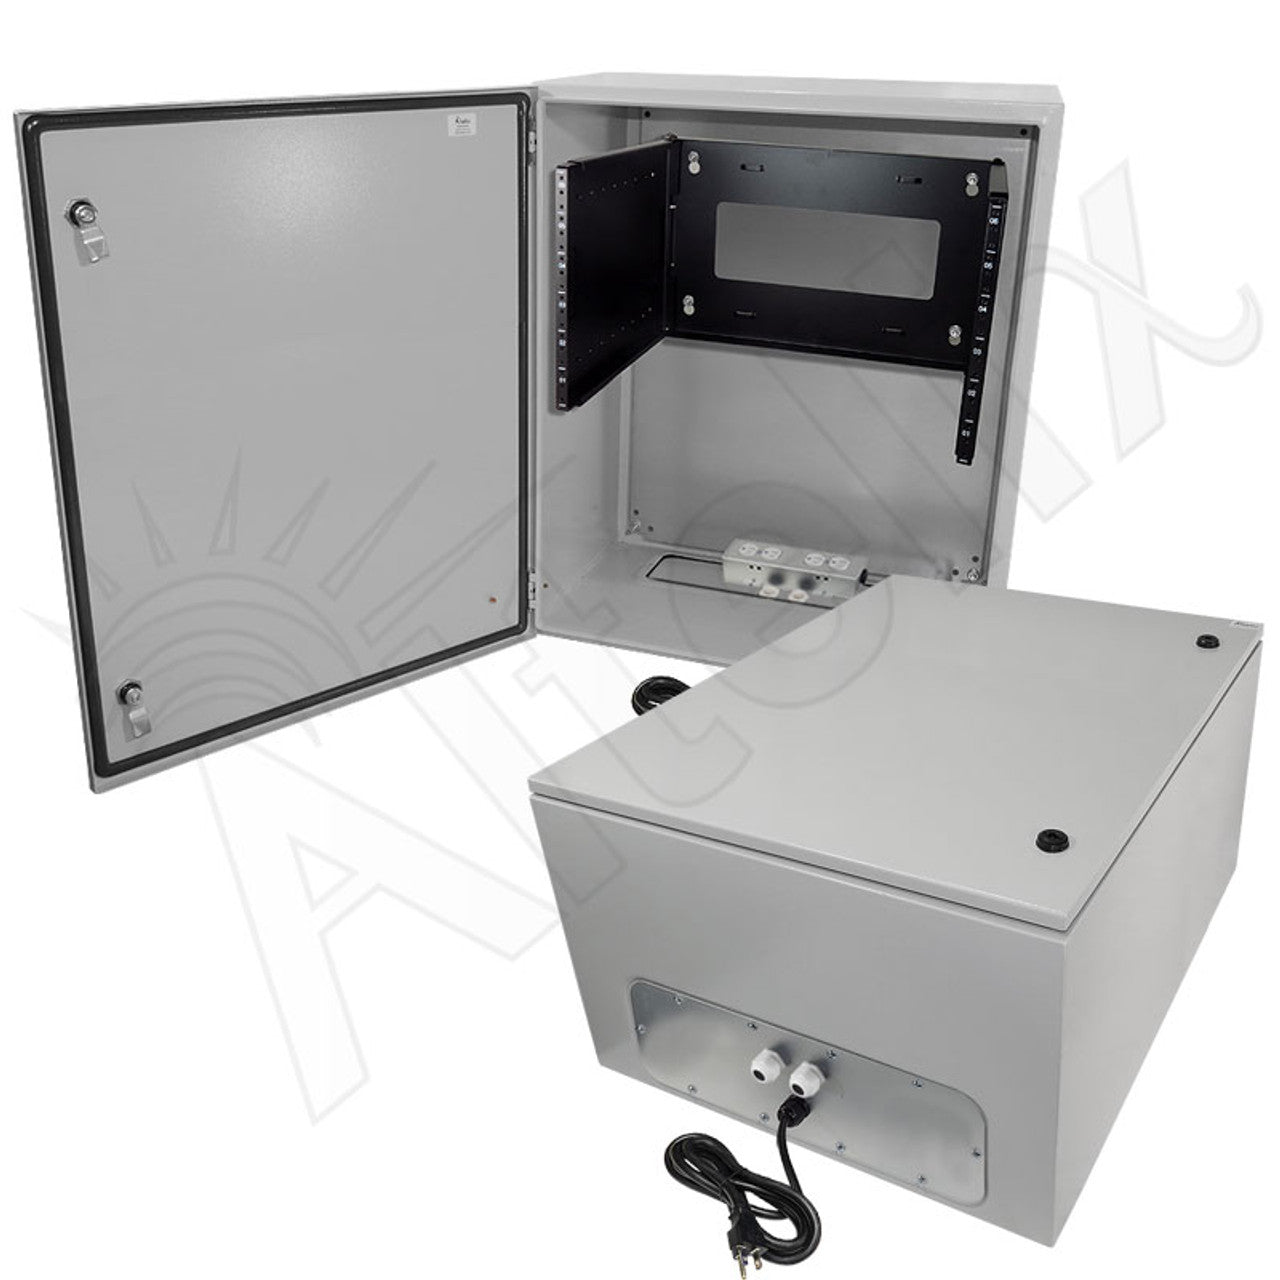 Altelix 120VAC 20A Steel NEMA 4X Enclosure for UPS Power Systems with 19" Wide 6U Rack, 20A Power Outlets and Power Cord